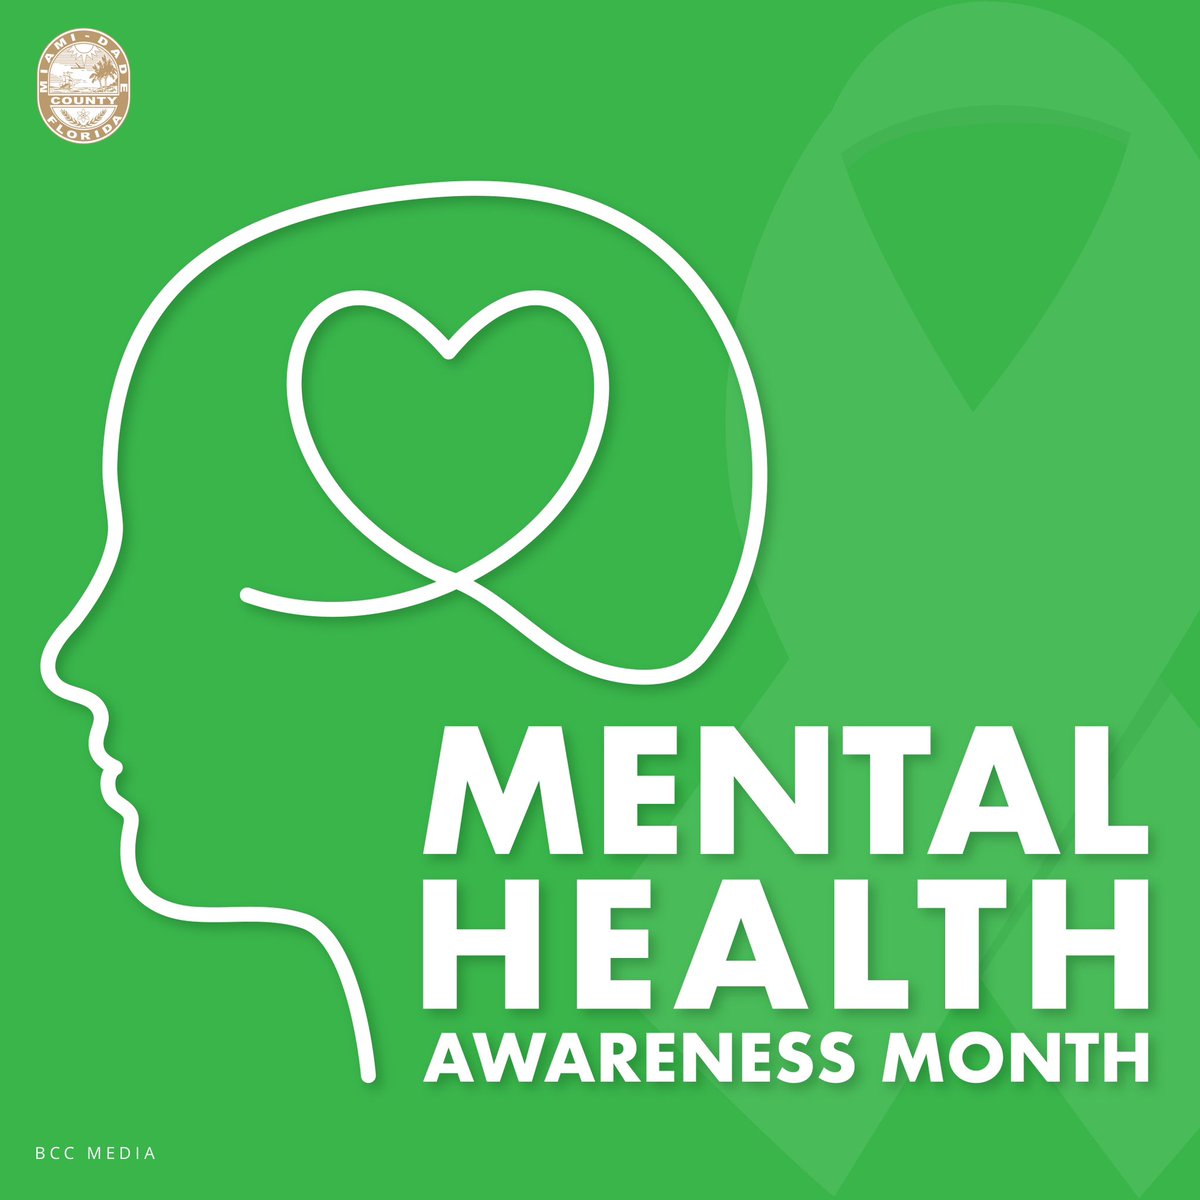 Thanks to a resolution sponsored by Commissioner @SenReneGarciaFL, #OurCounty recognizes May as Mental Health Awareness Month to bring attention to our current mental health crisis. Let's stand together to educate our community and help erase the stigma against mental health. 💚